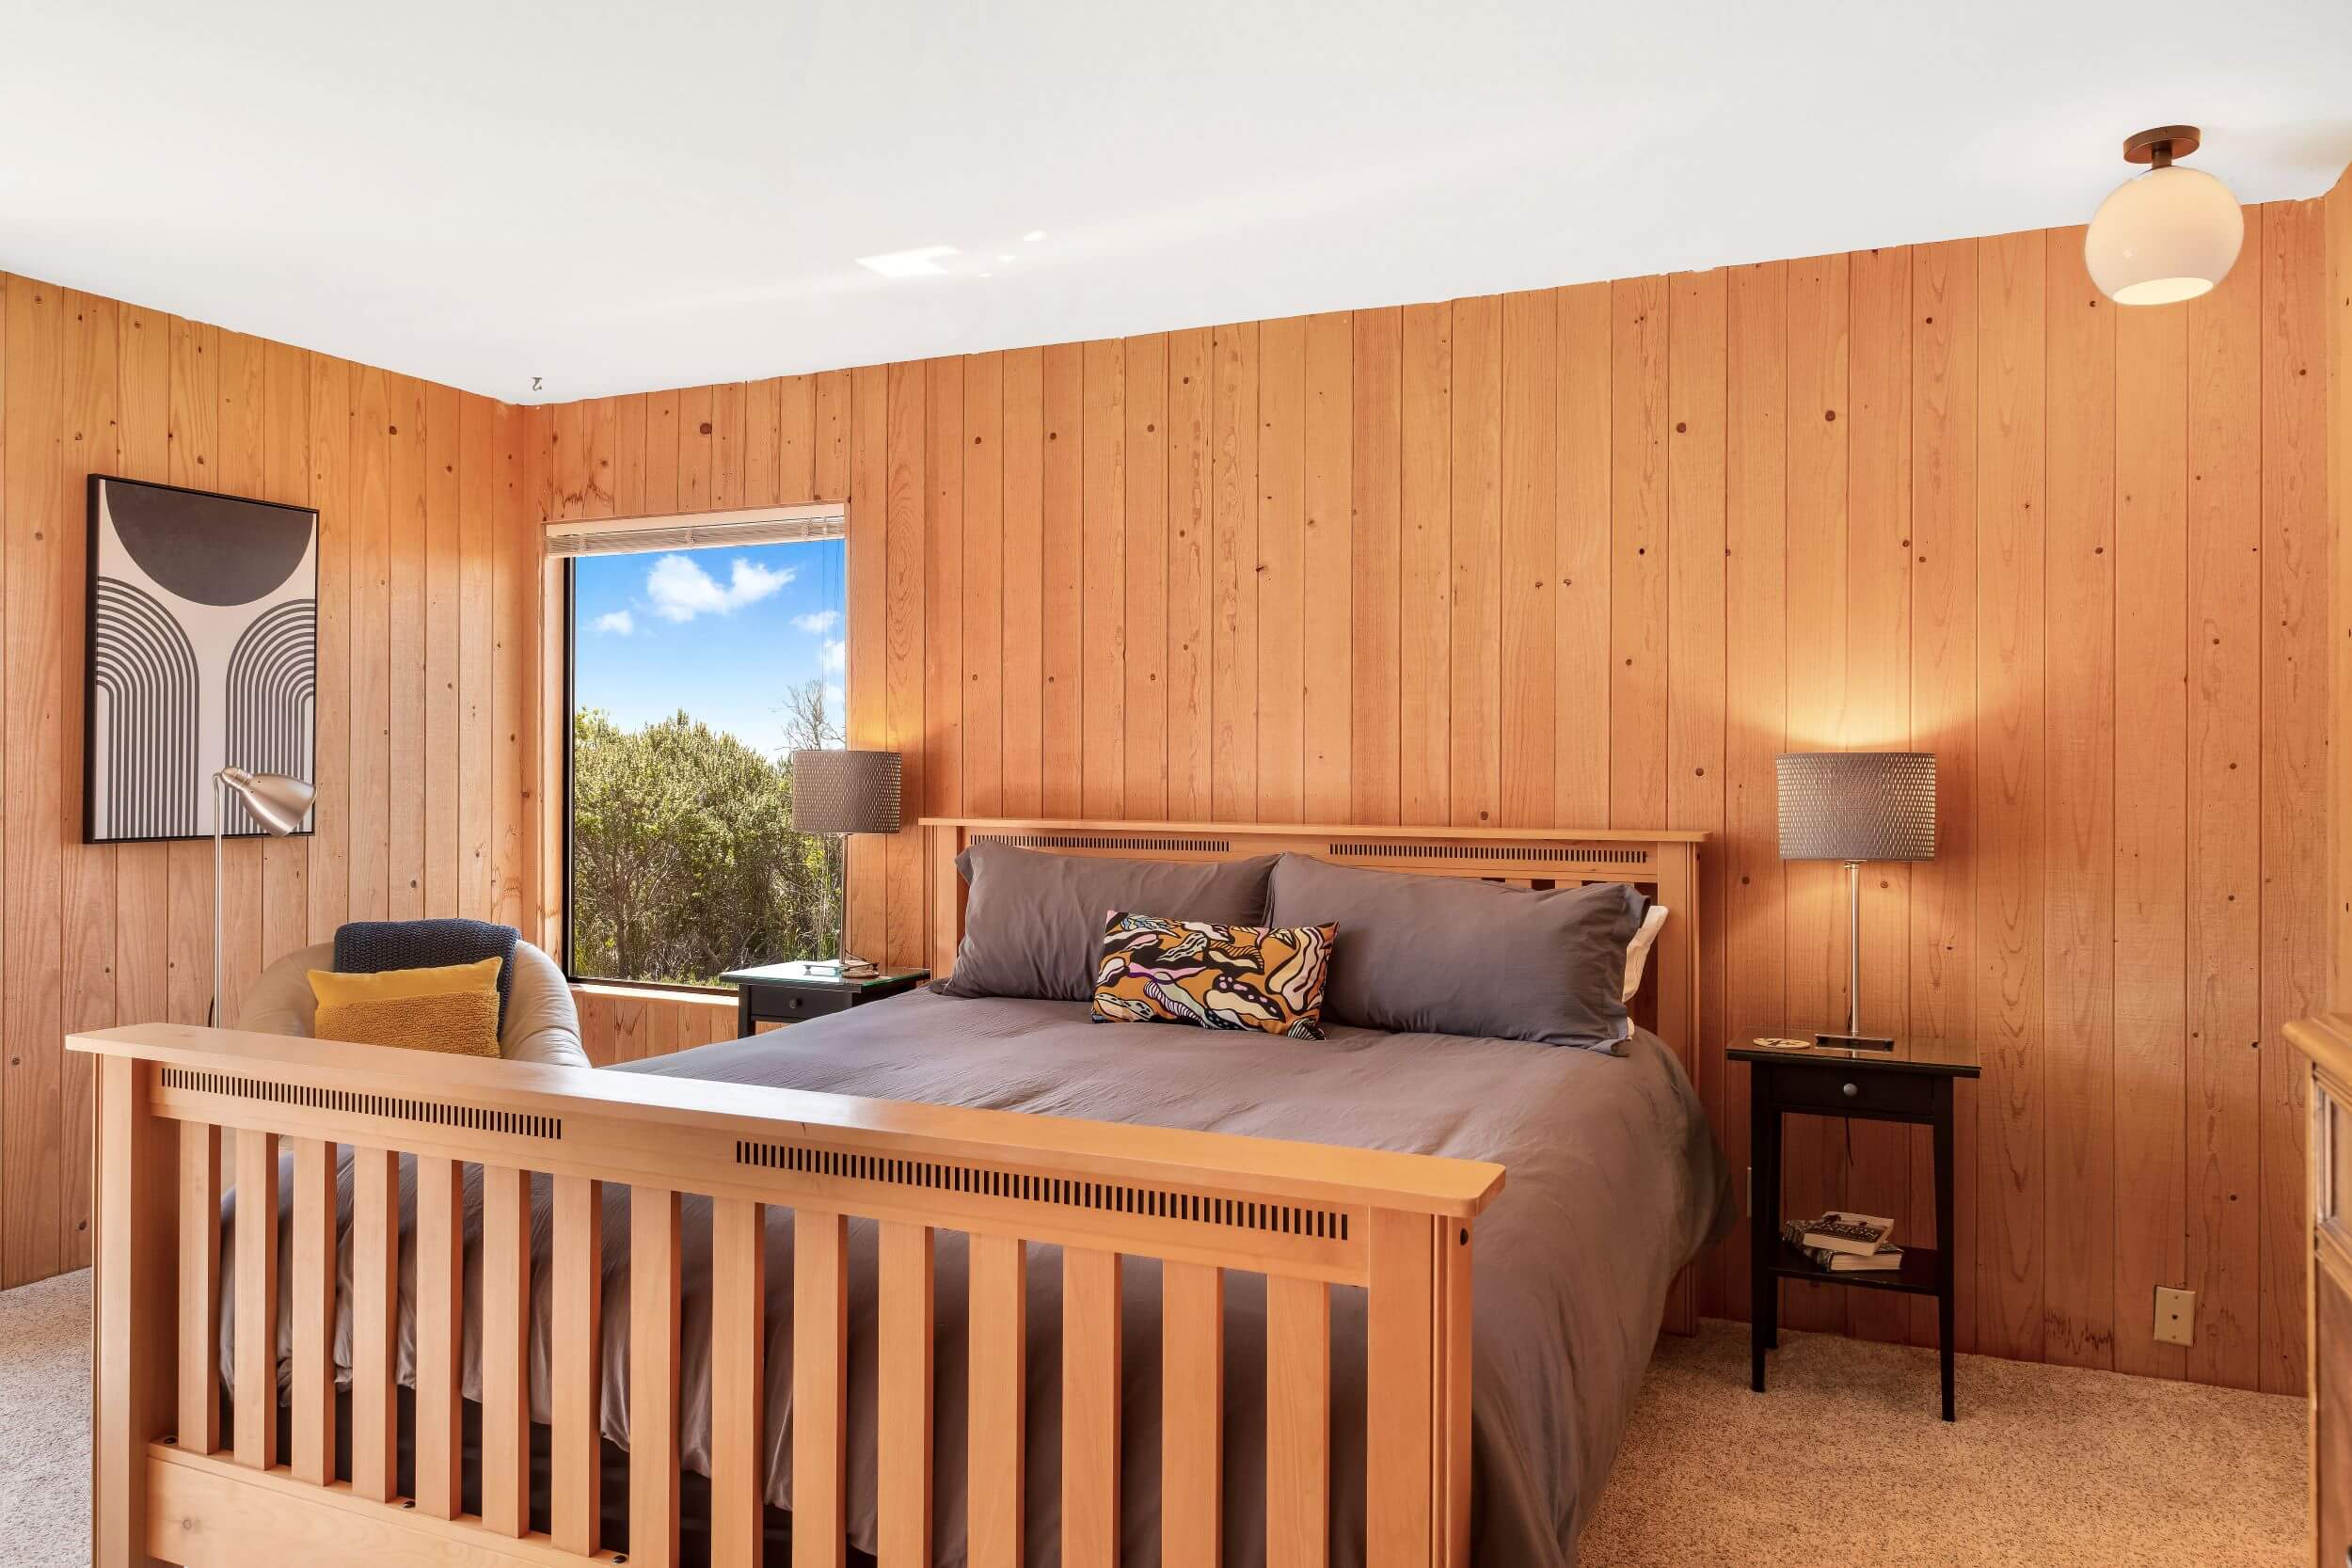 Sea Meadow: 2nd large bright bedroom with wood walls and window looking onto meadow.